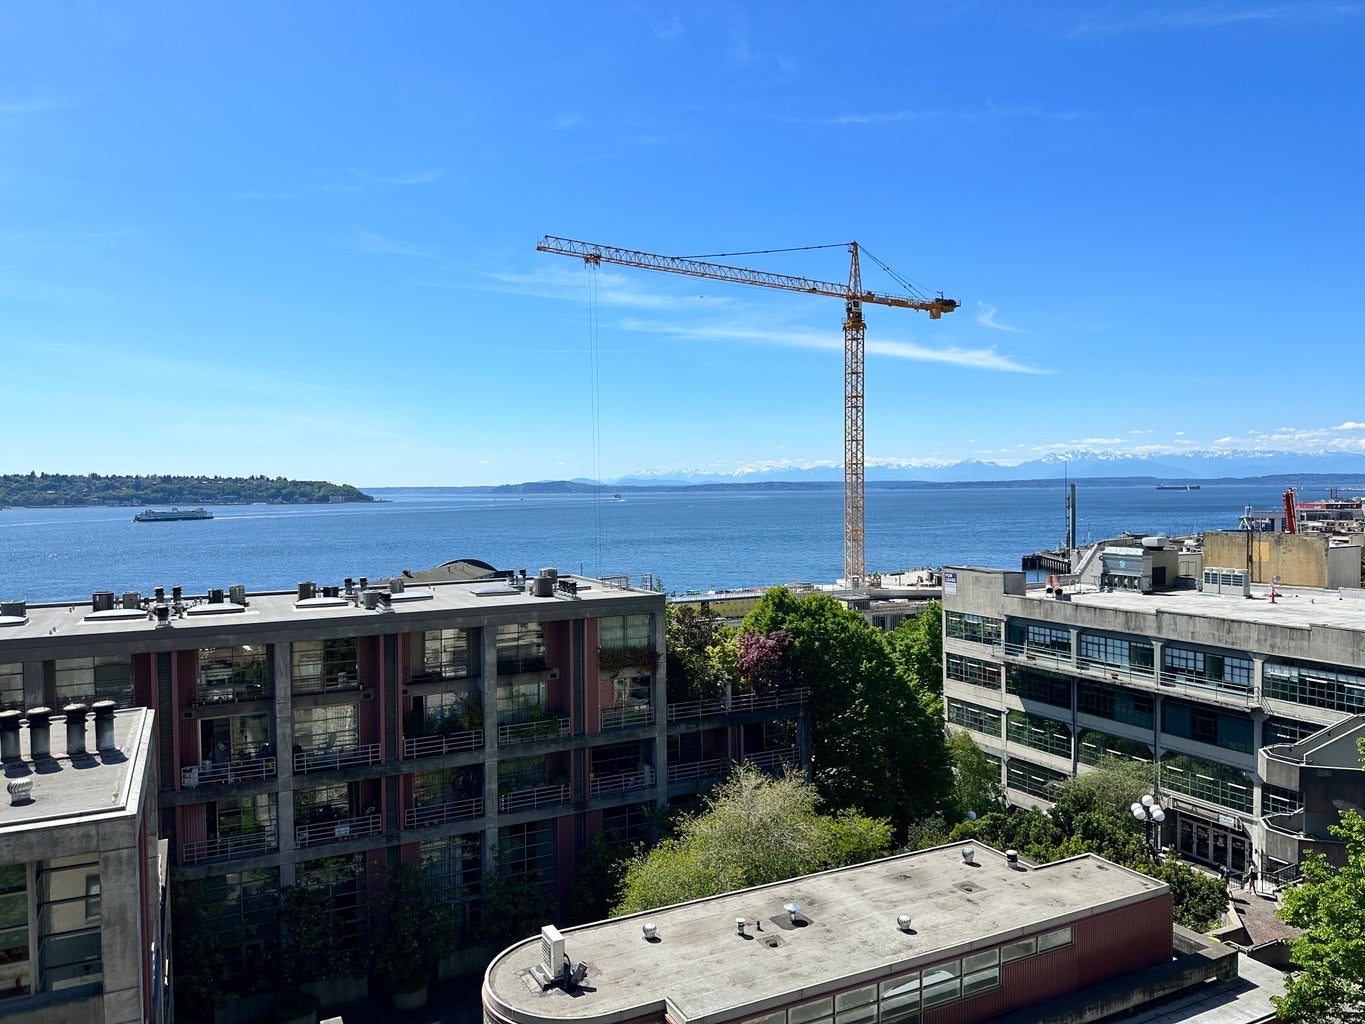 View of water, buildings, and mountains from rooftop in Seattle, Washington.